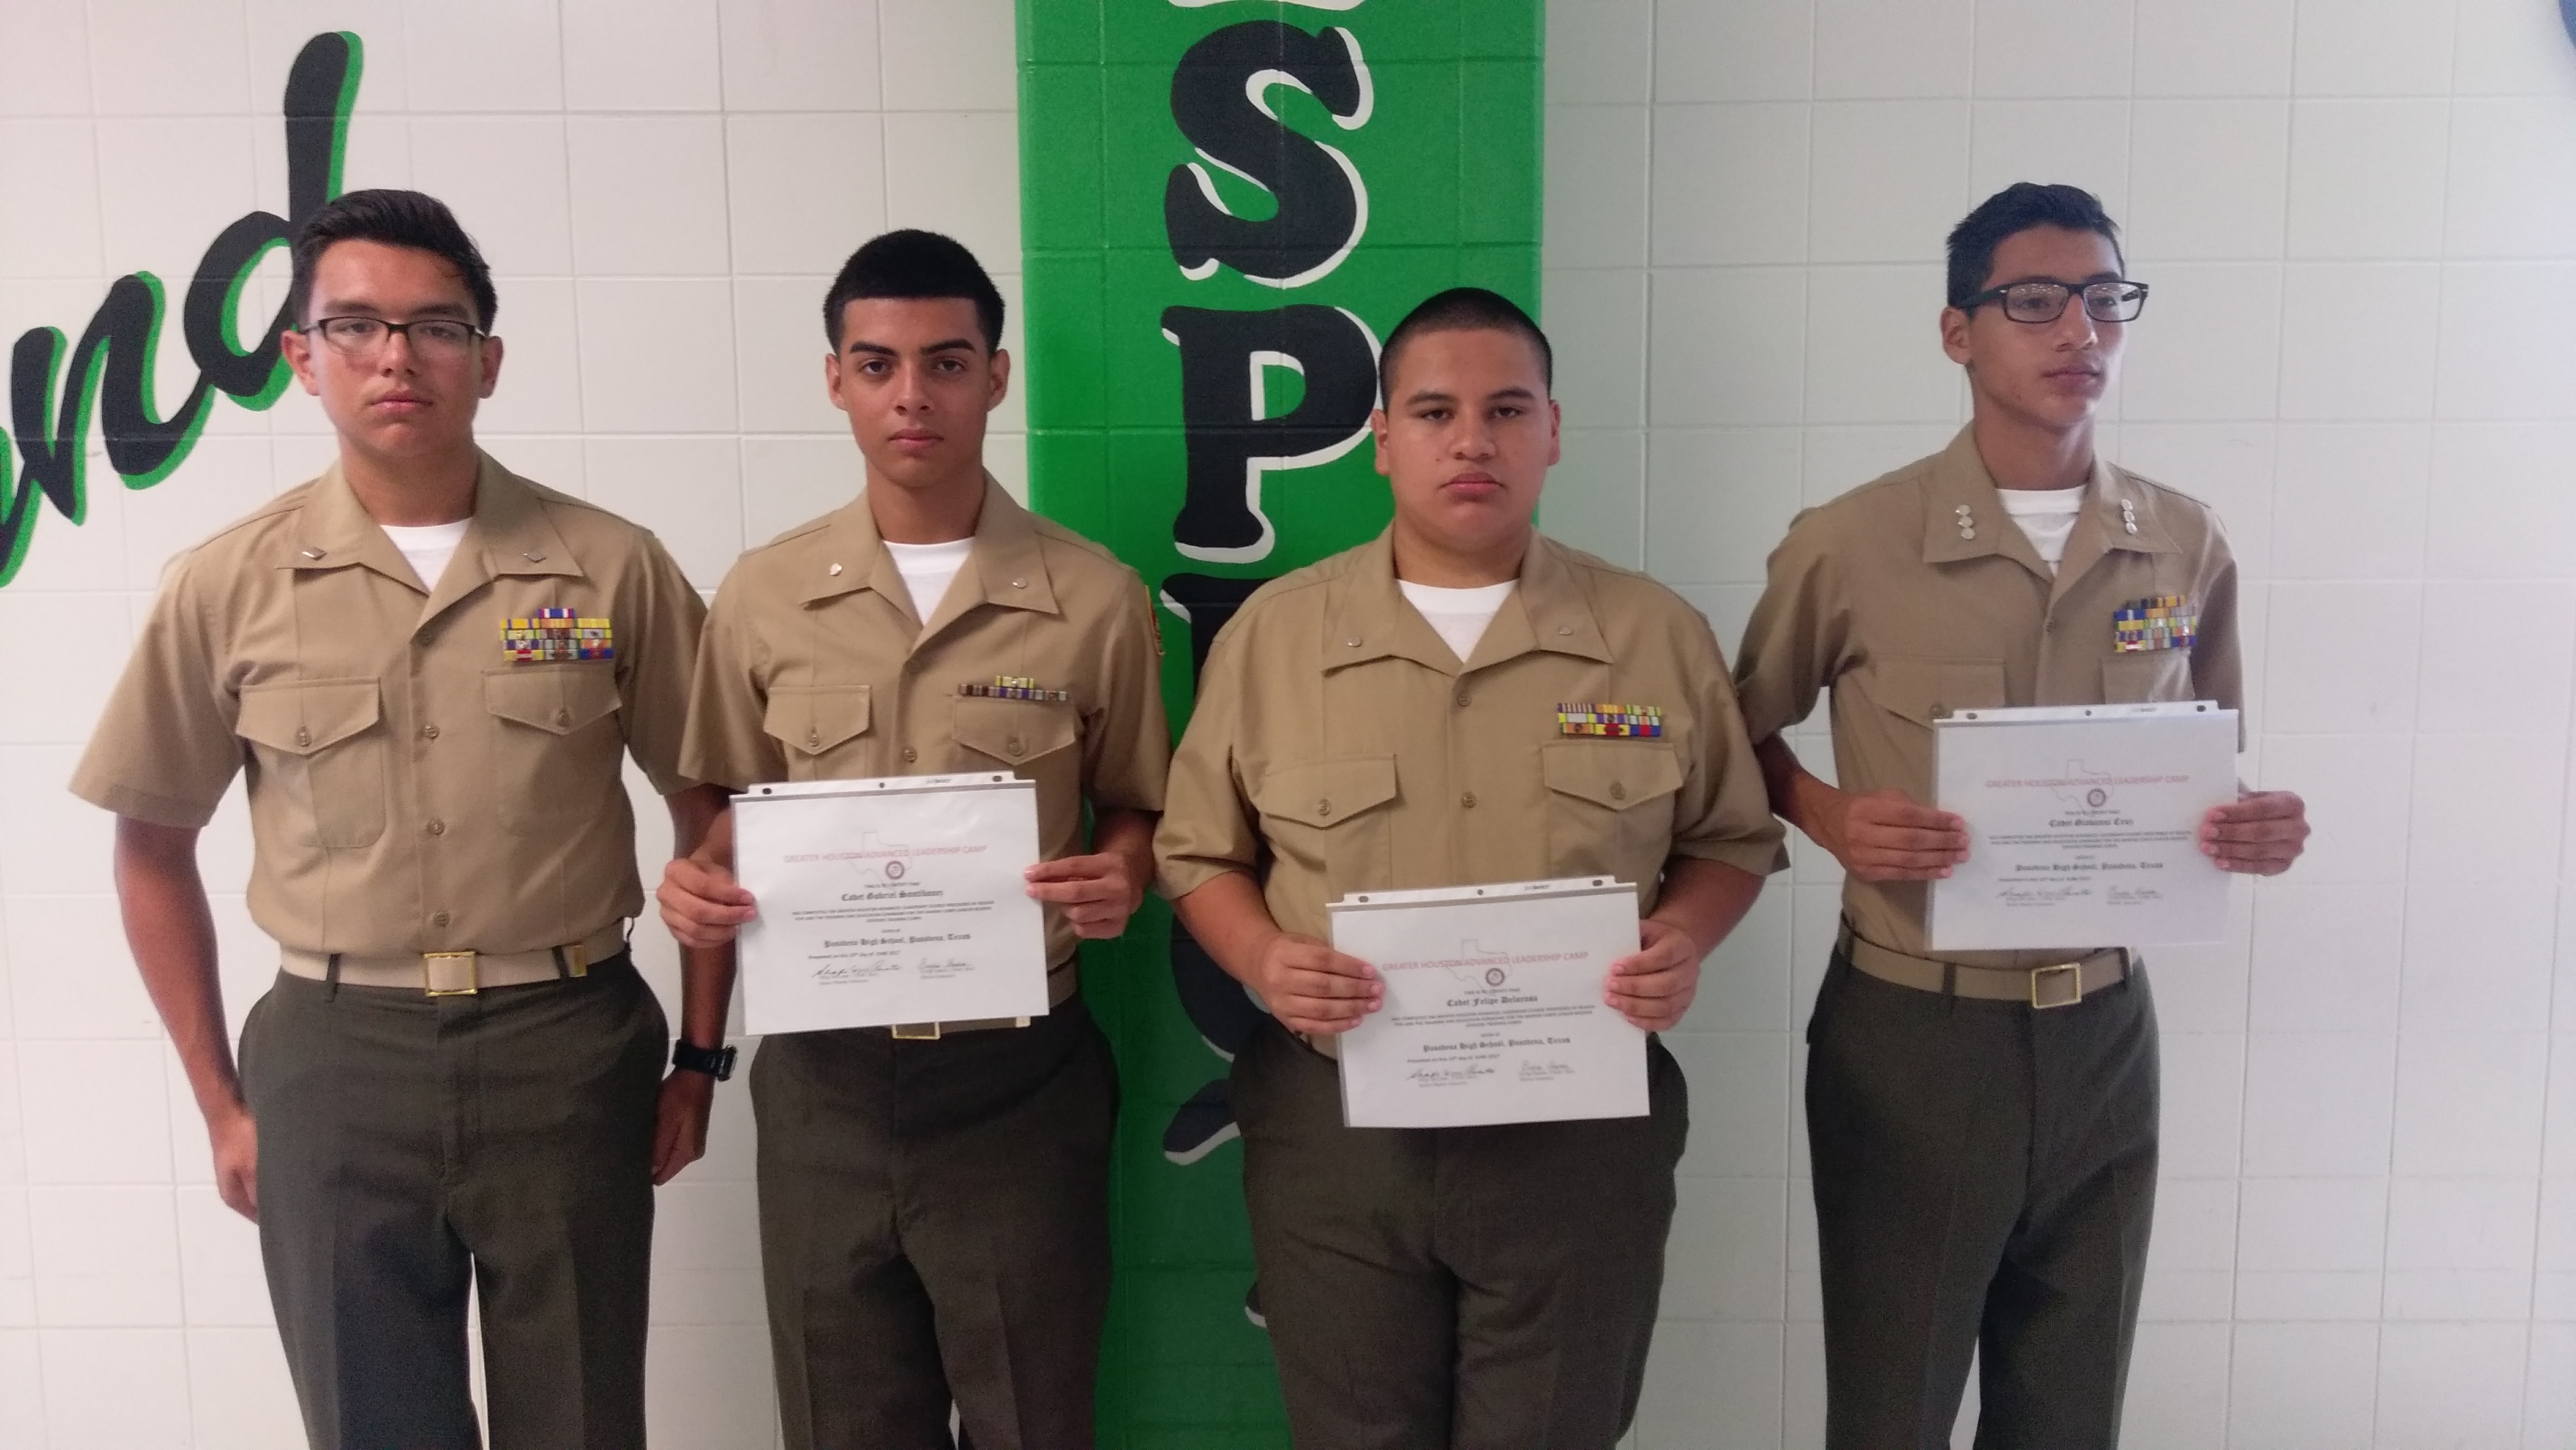 Cadets from the Ross S. Sterling High School MCJROTC display their certificates after graduating from Advanced Camp. Pictured are (from left) Cadets Isaiah Cano, who ran events; Gabriel Santibanez; Felipe Delarosa and Giovanni Cruz.
The MCJROTC is under the direction of Col. P.J. Ferral USMC (Ret).
